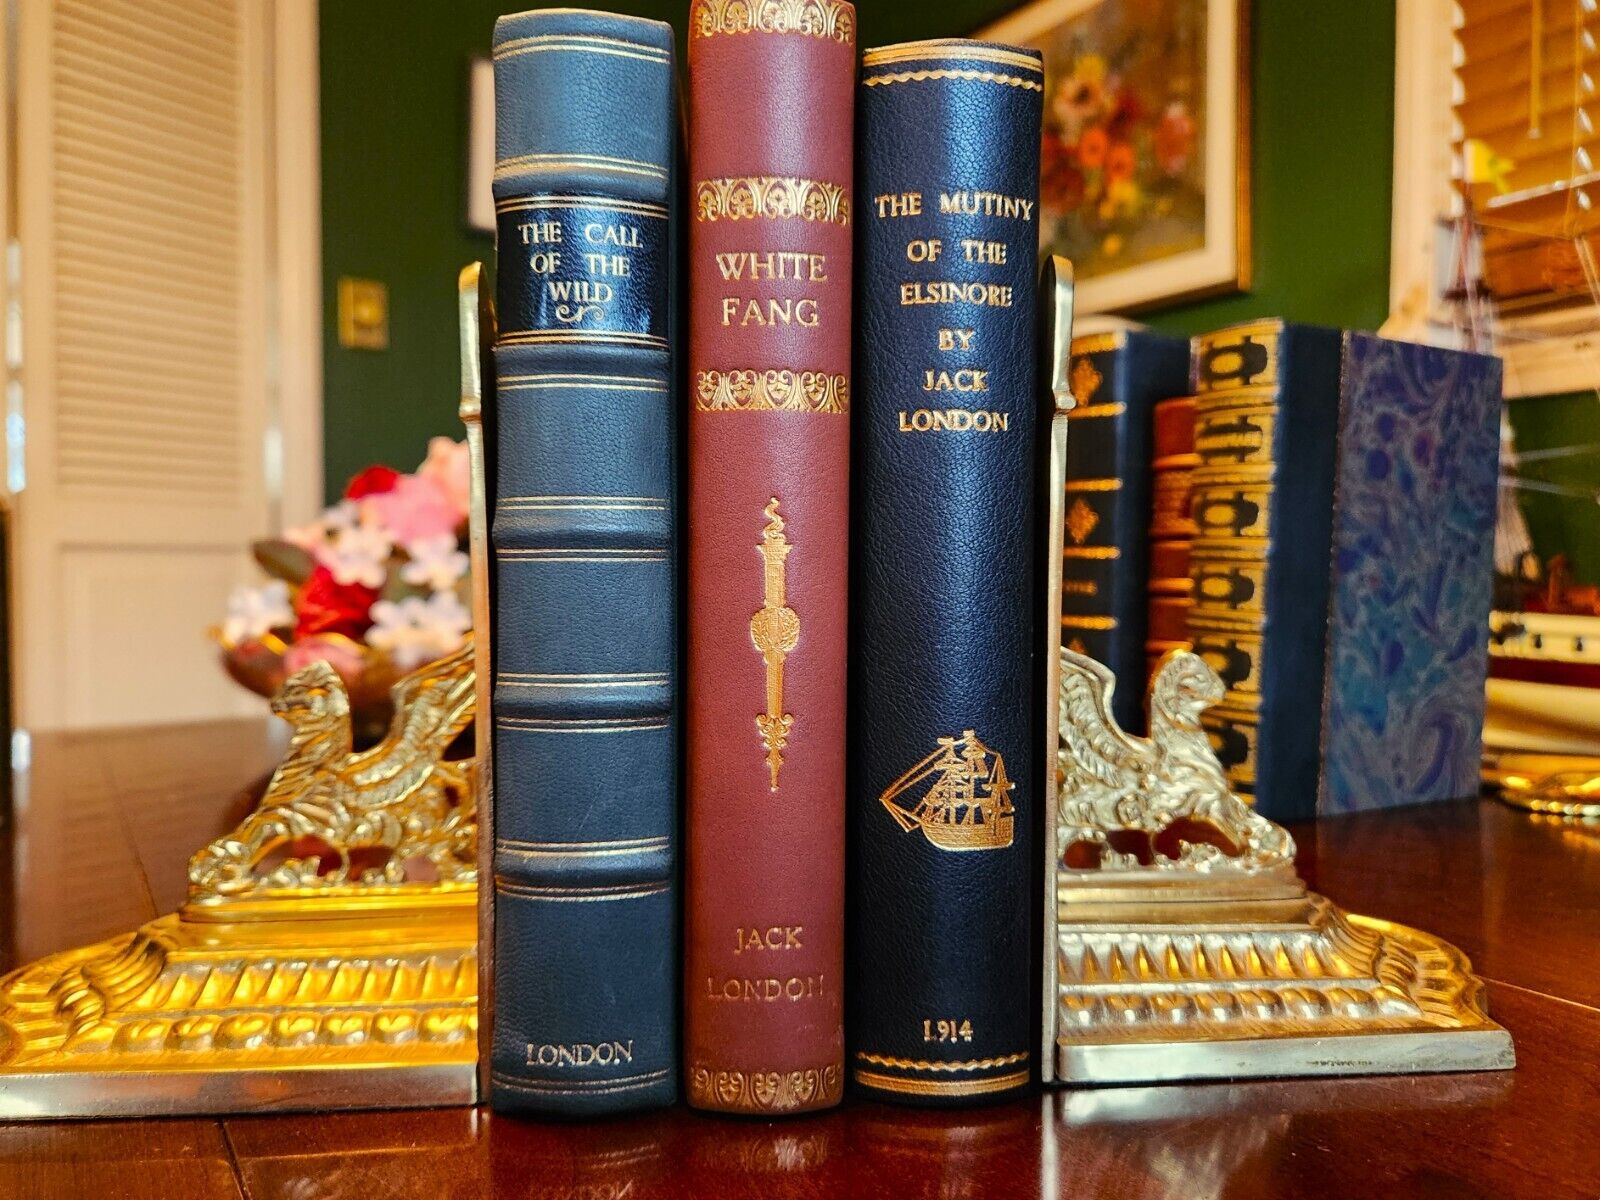 Jack London. Fine leather bindings. 3 Titles. An exquisite set. Gorgeous. 